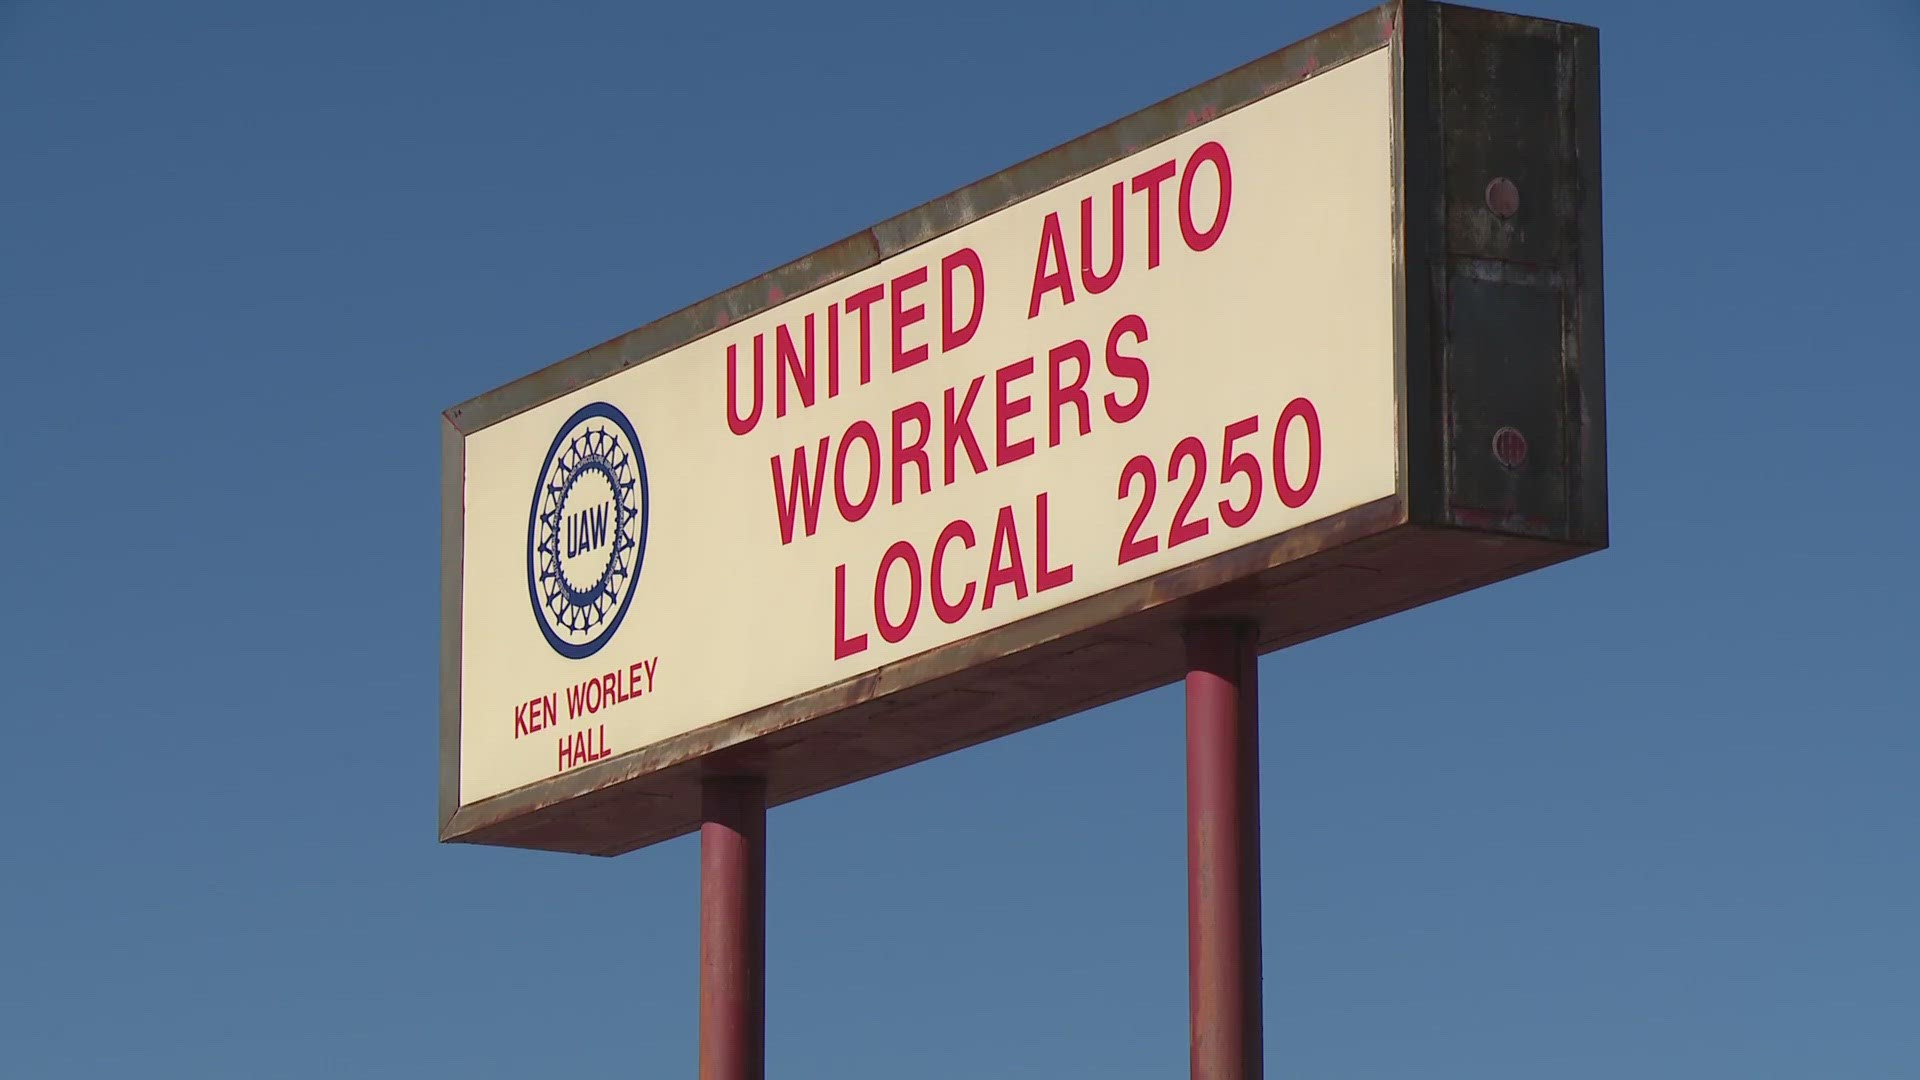 Even though a majority of Wentzville members voted not to ratify the new contract, they may still end up working under it.